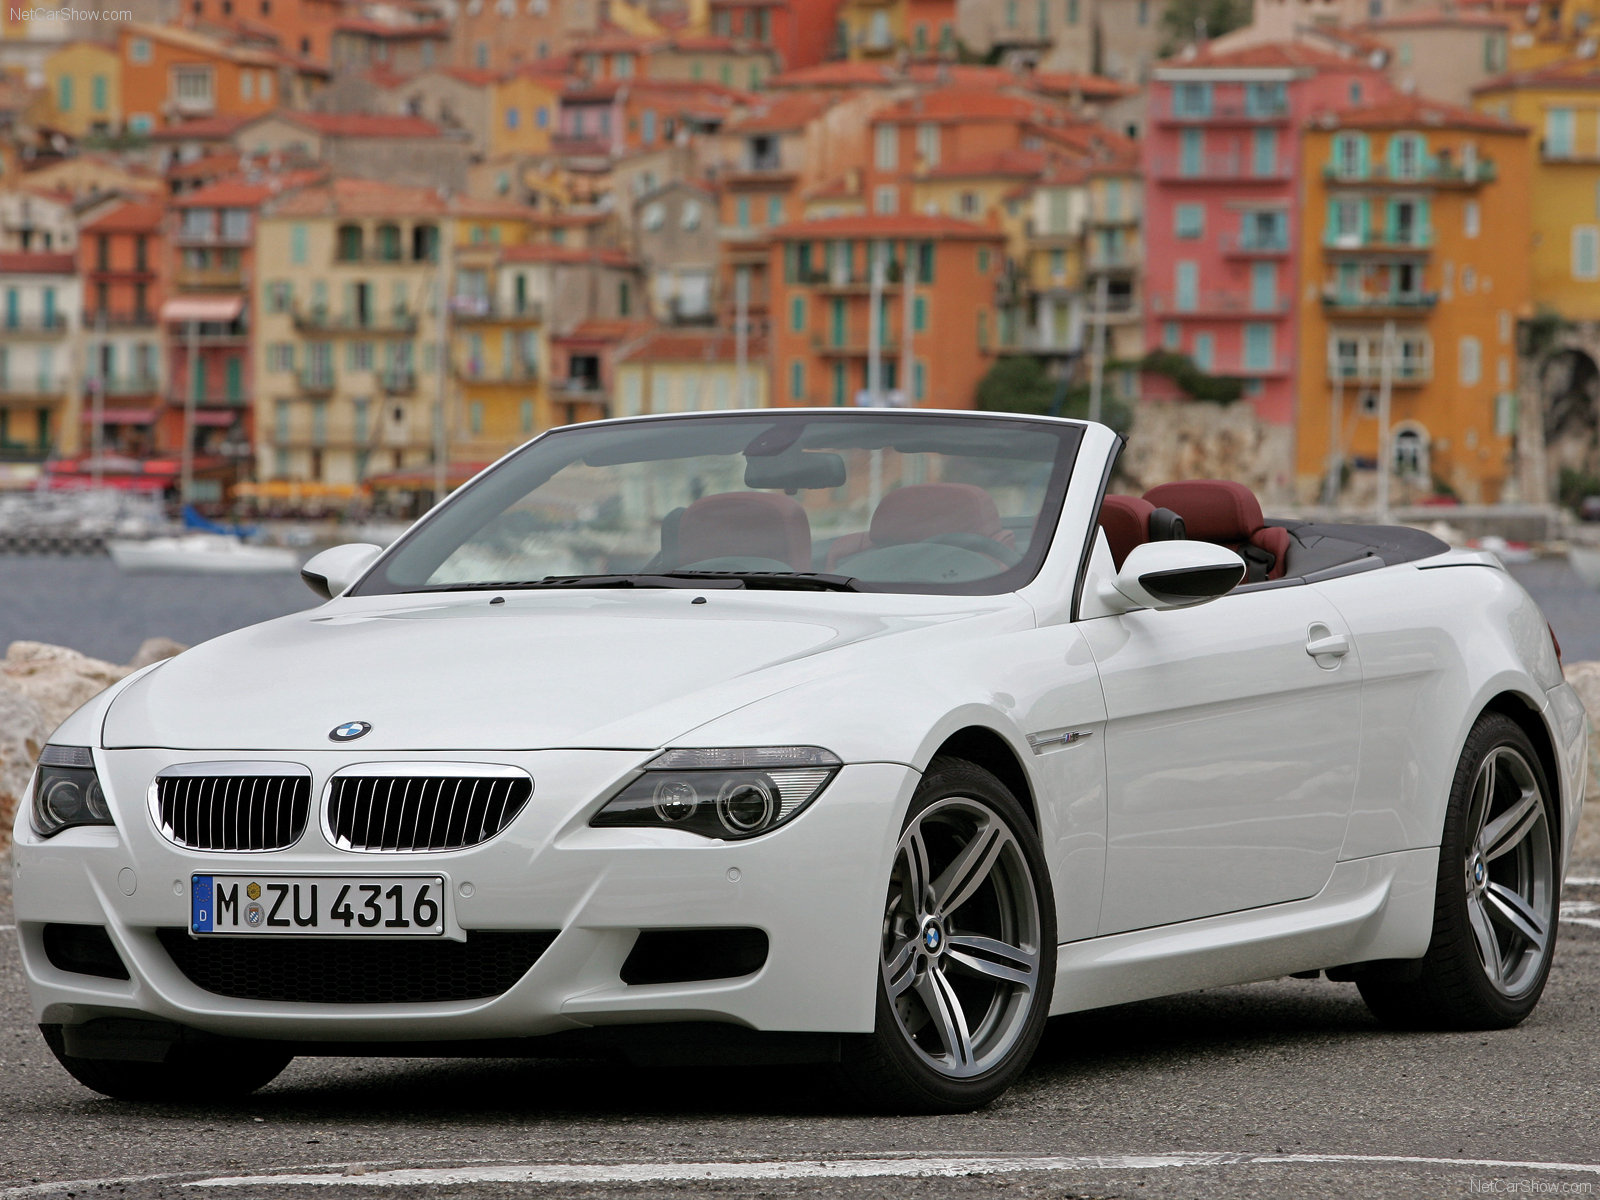 BMW M6 E64 Convertible picture 63898 BMW photo gallery